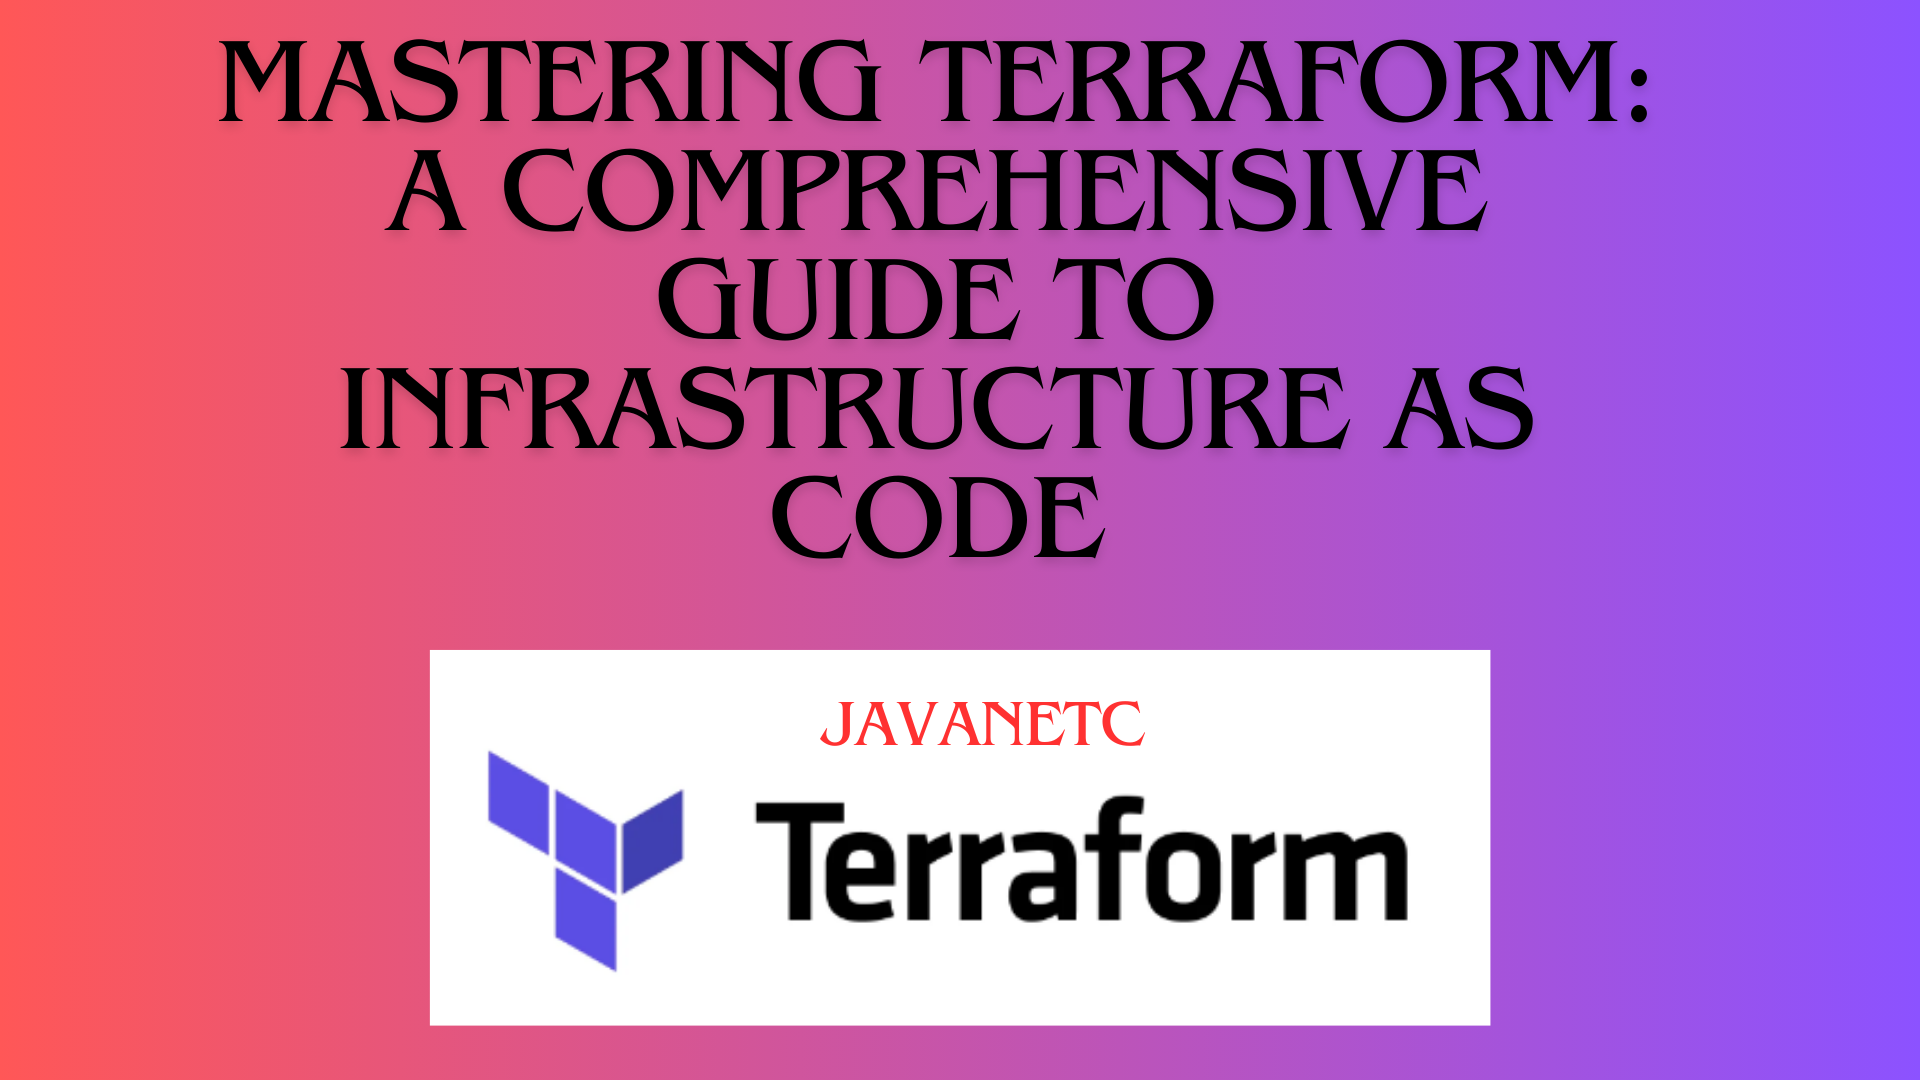 You are currently viewing Mastering Terraform: A Comprehensive Guide to Infrastructure as Code 2208